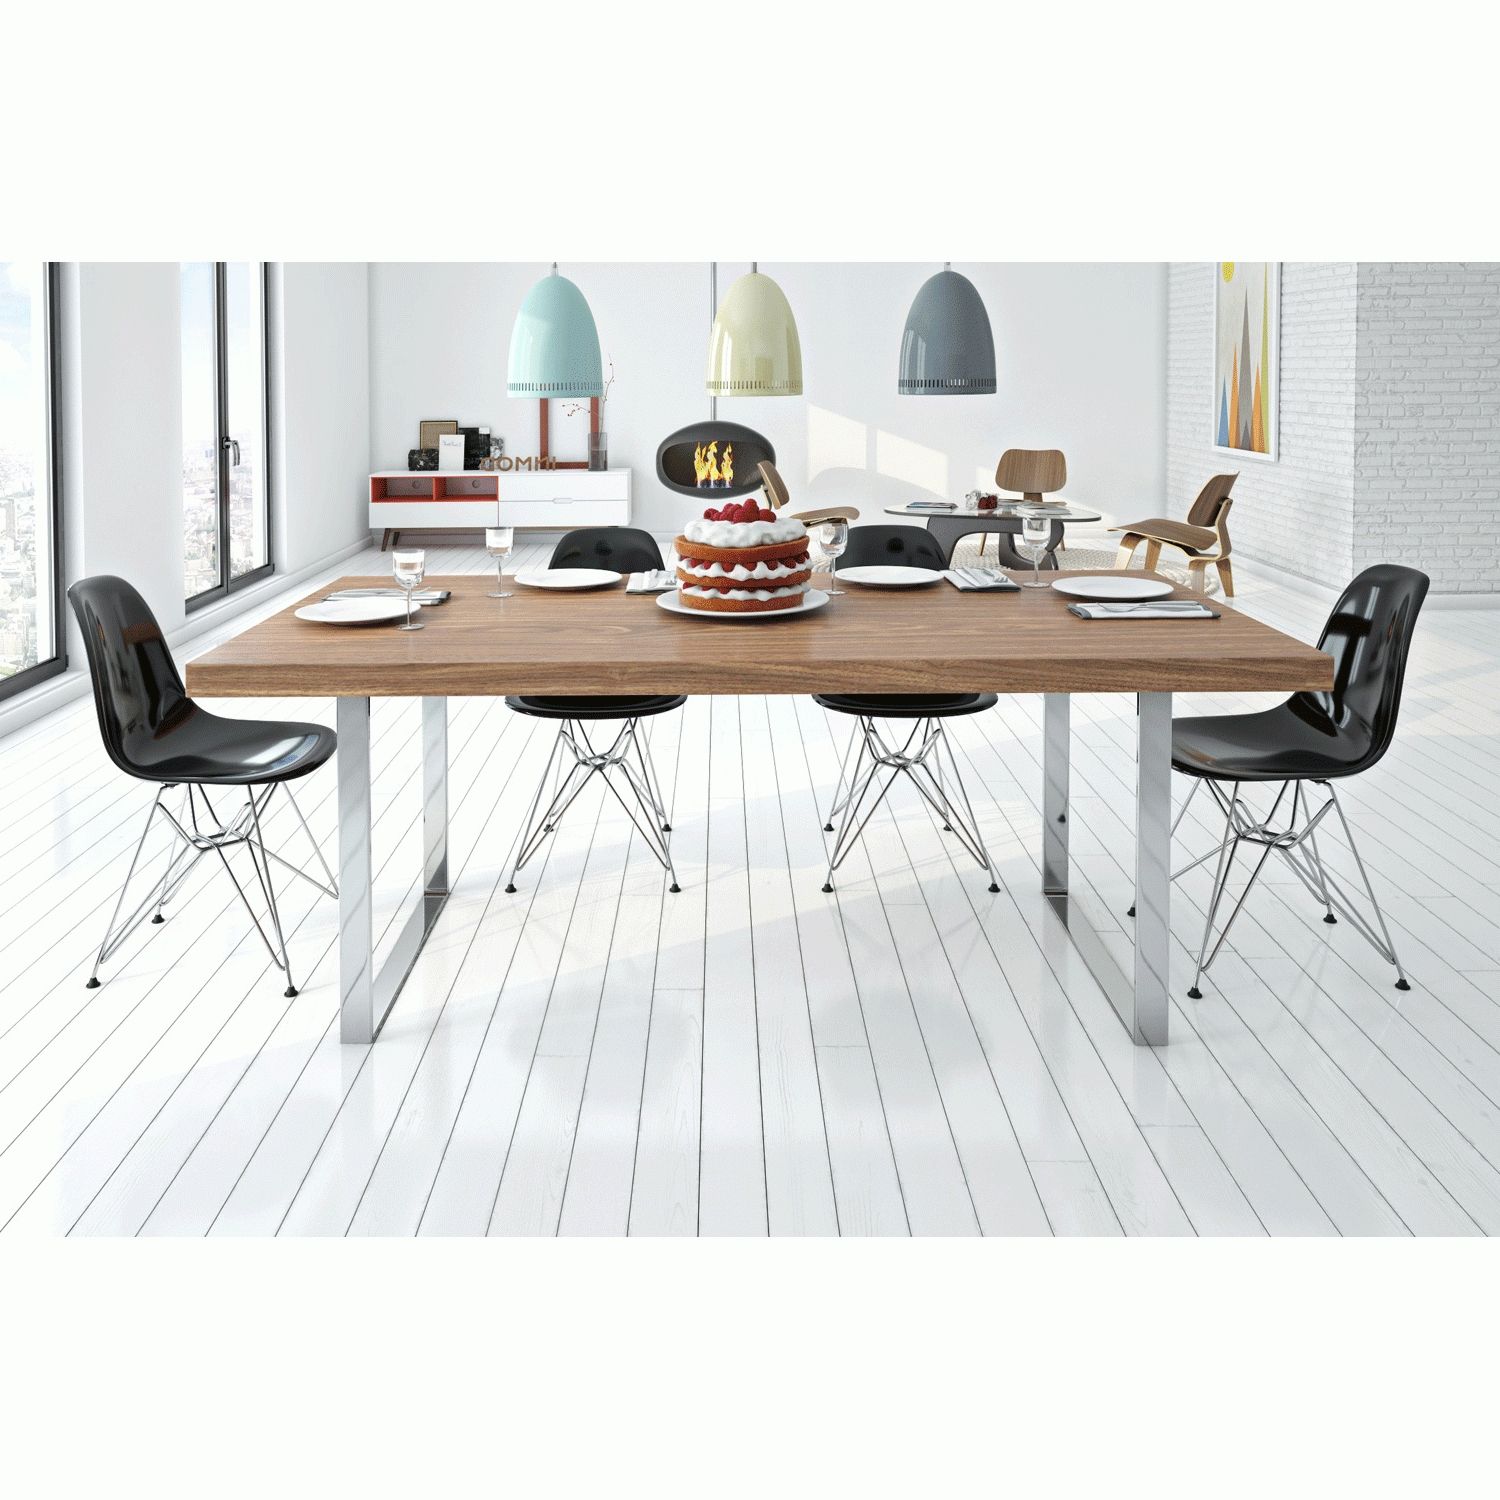 Roma Dining Tables In Well Known Eco Natura Roma Dining Table: Http://www (View 21 of 25)